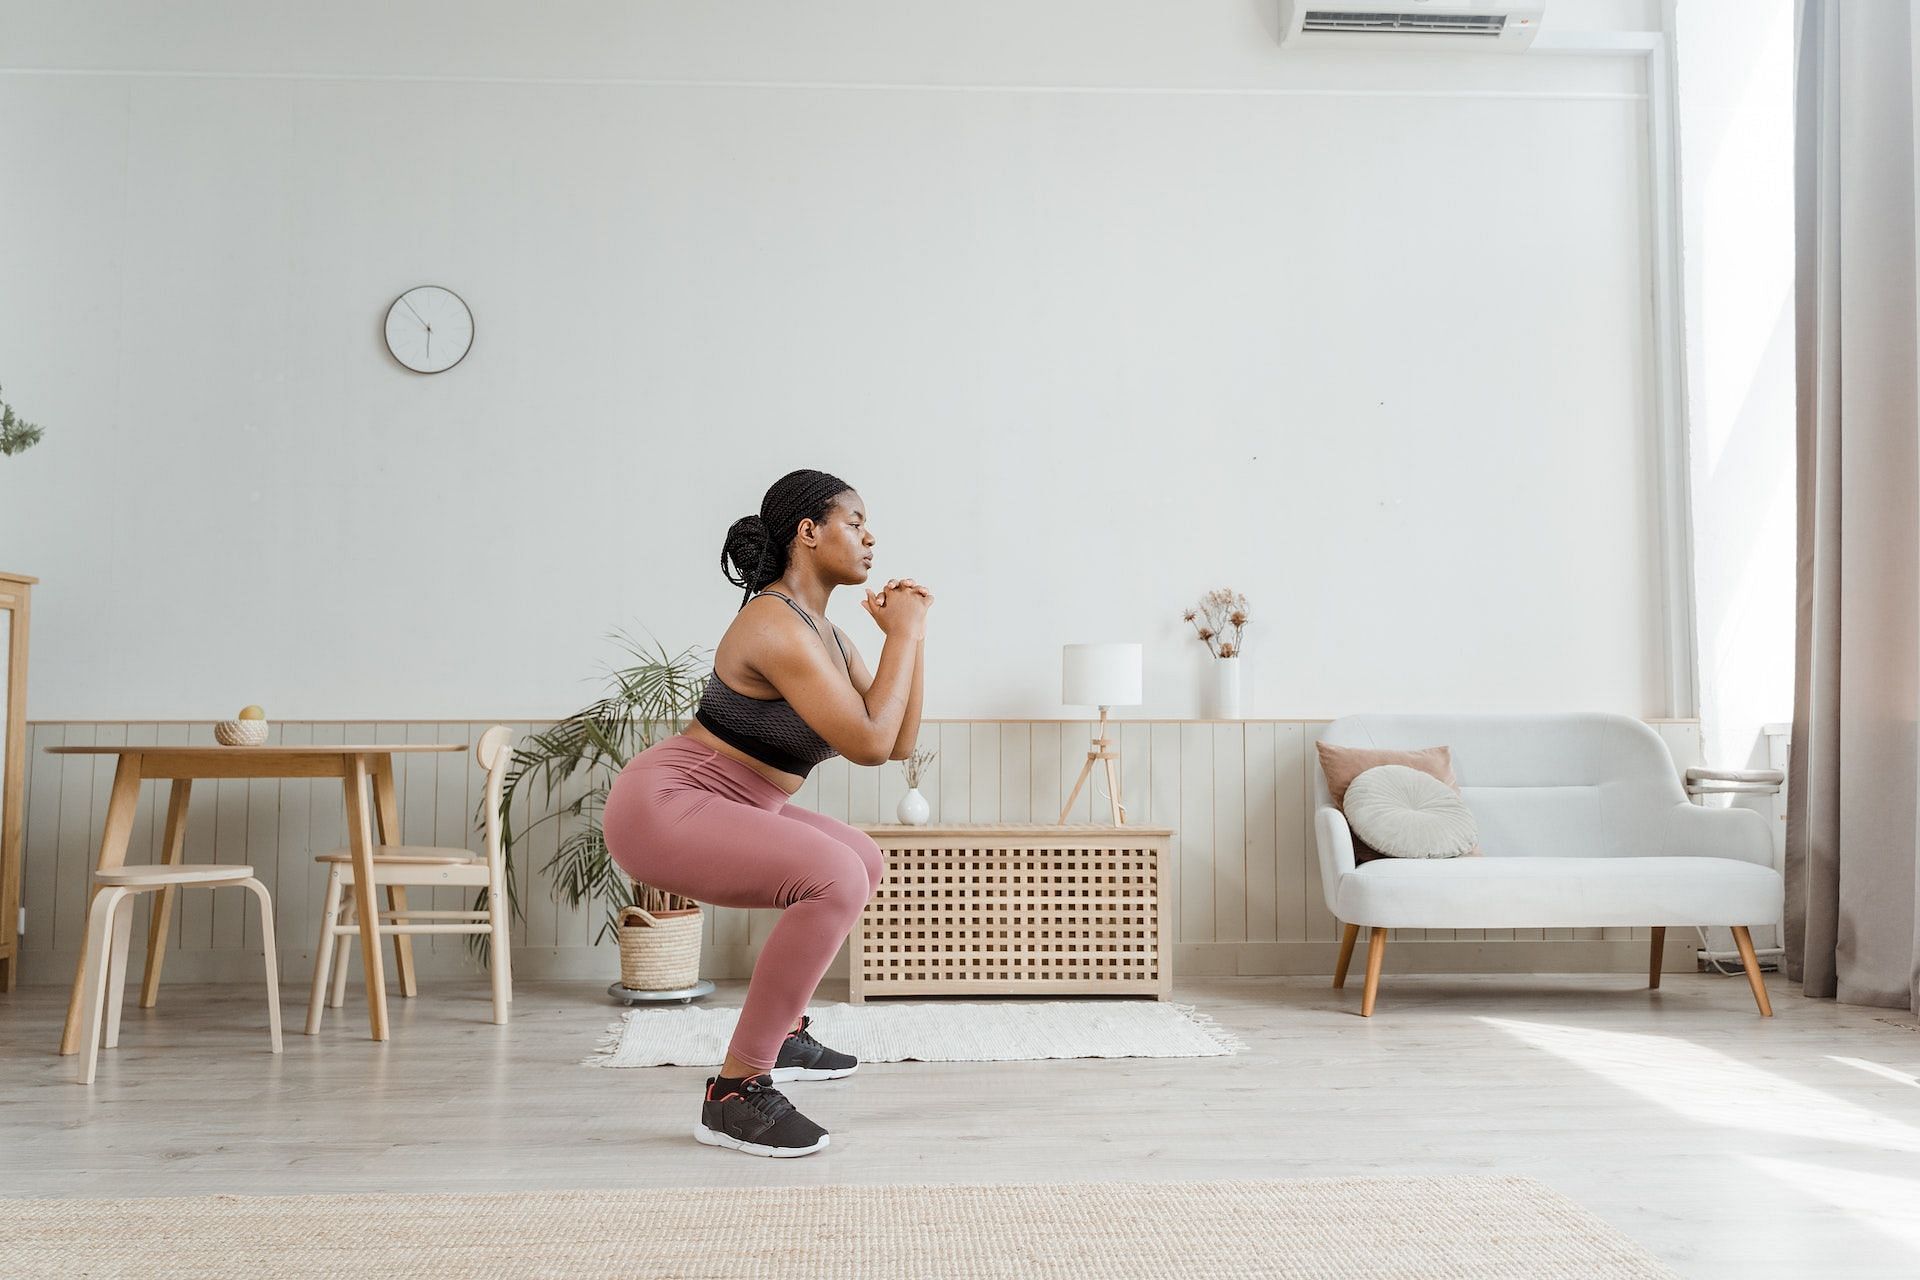 Squats stretch the lower body muscles. (Photo via Pexels/MART PRODUCTION)